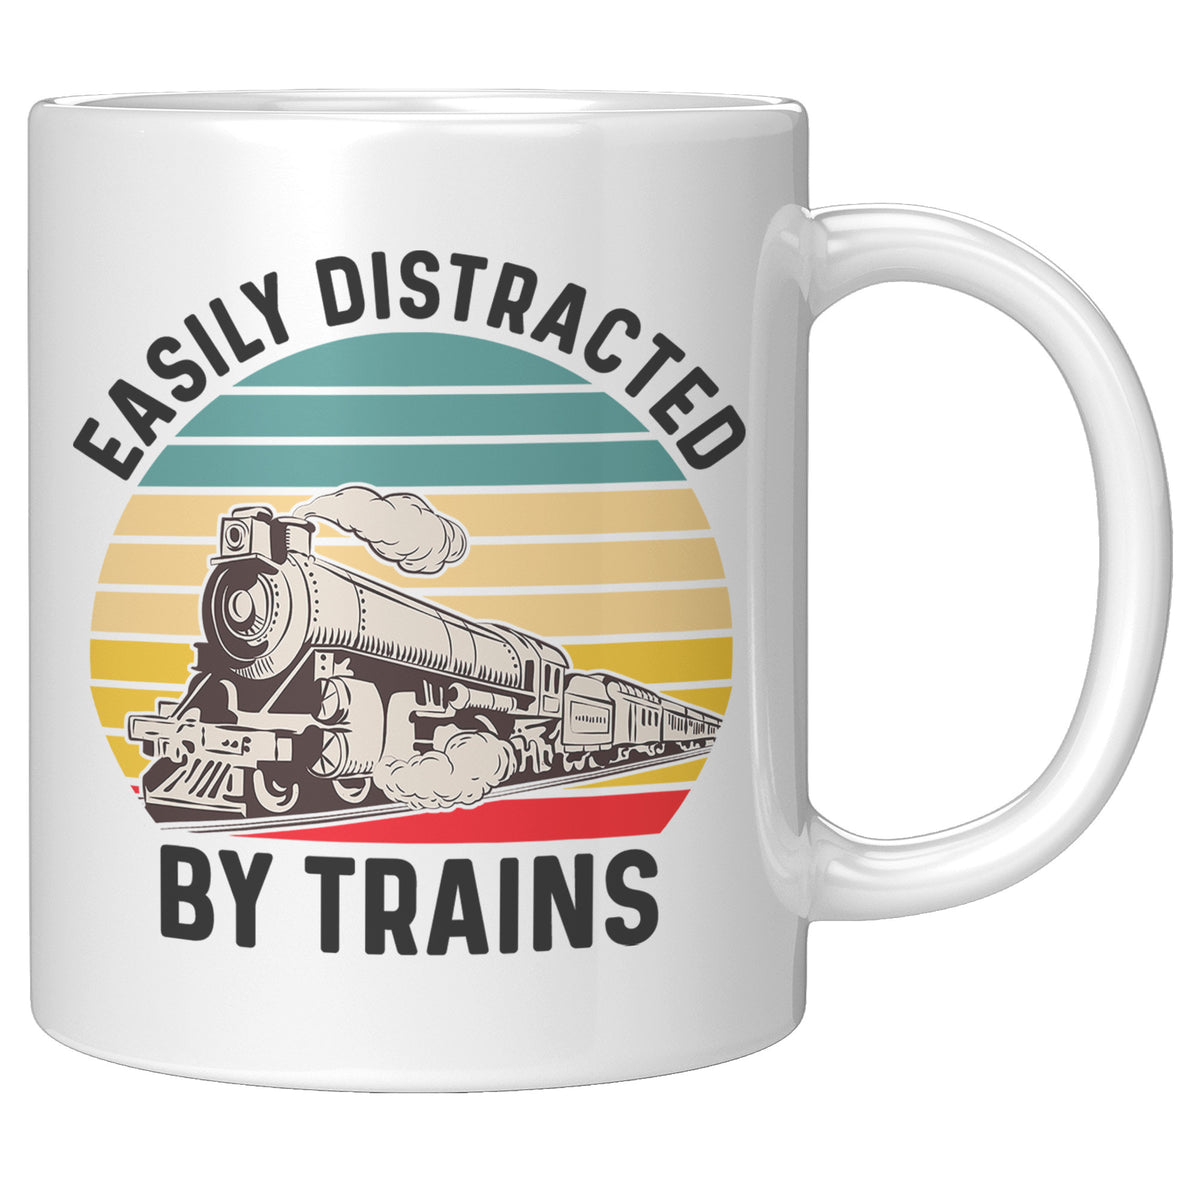 Train Mug - Easily Distracted by Trains